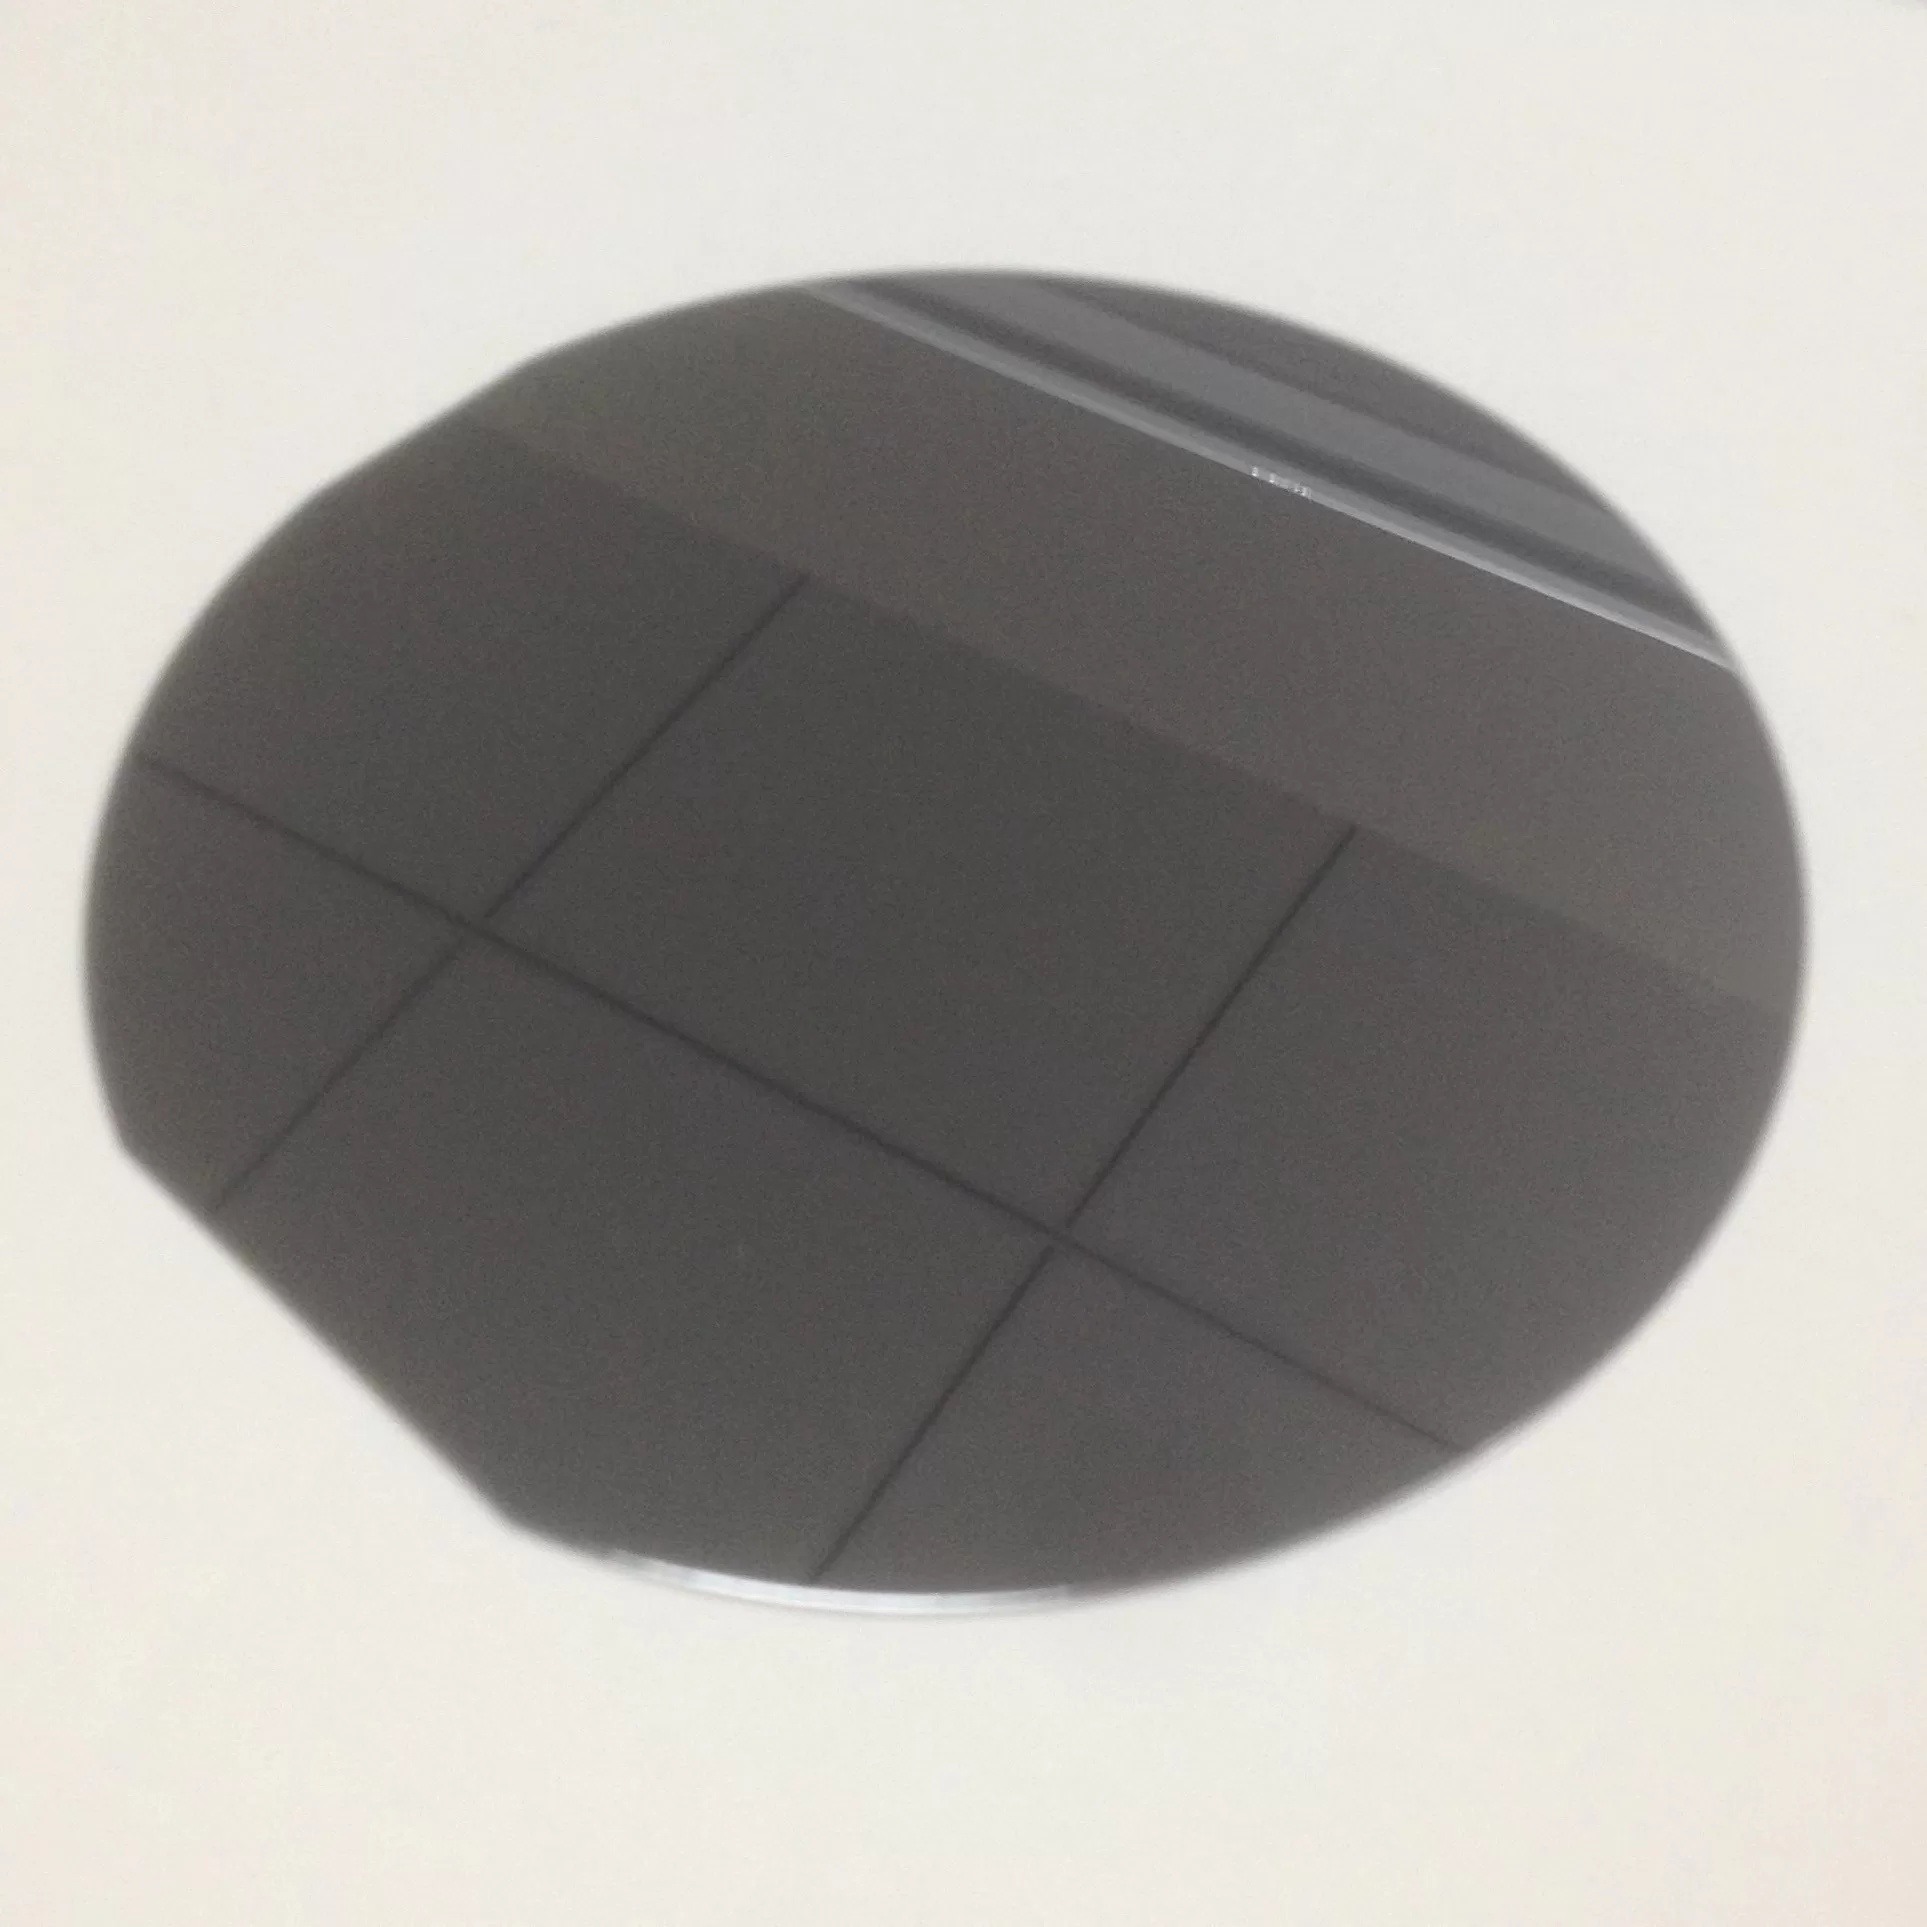 Optimal High Purity Silicon Wafer Photovoltaic (Solar Cell) Manufacturing 2 4 6 8 10 12 inch